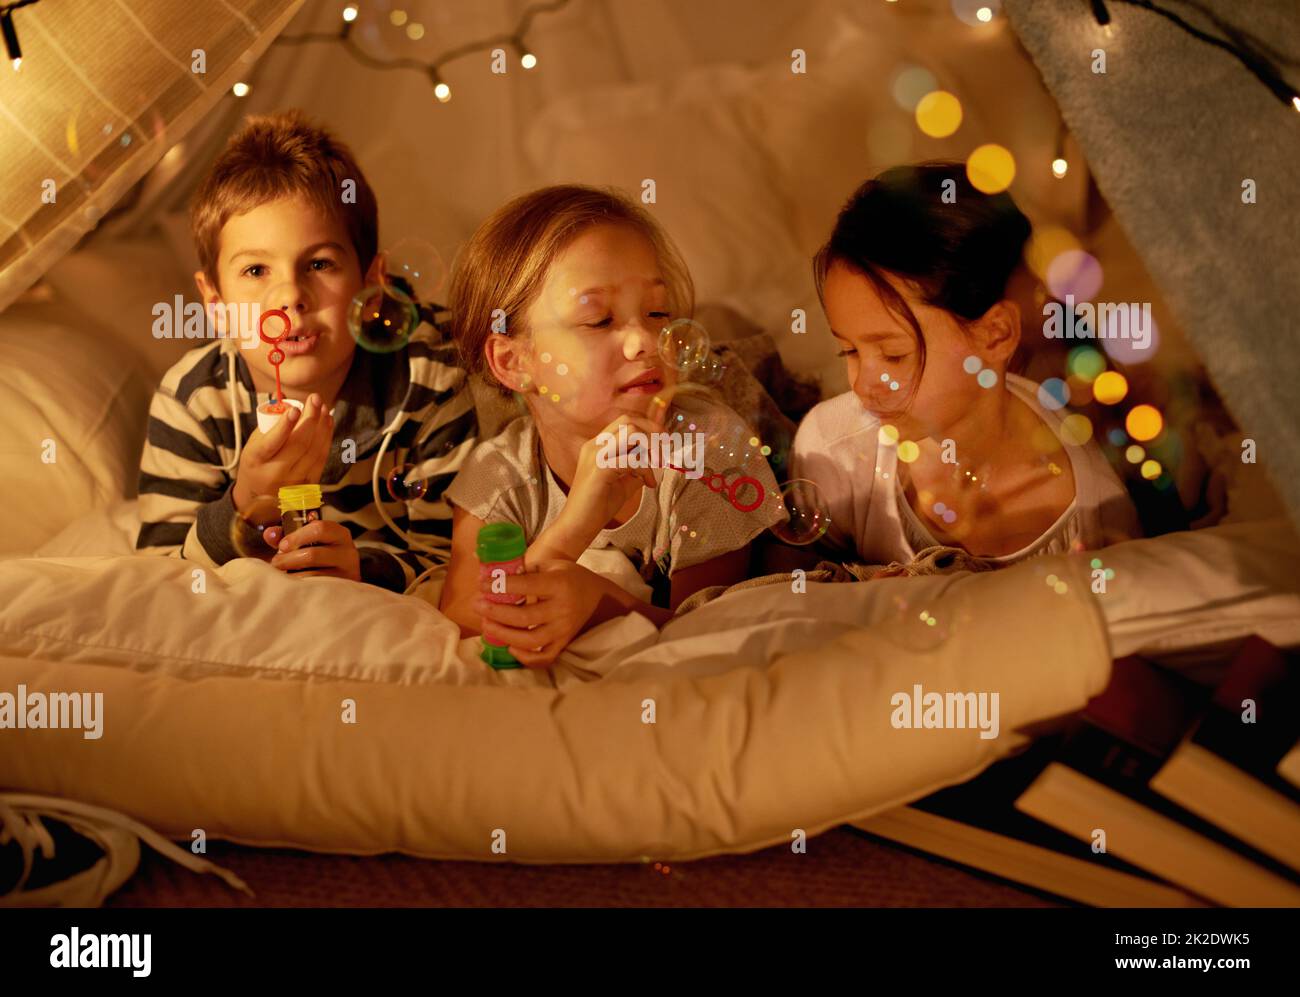 Camping in the bedroom. Shot of three young children in a blanket fort blowing bubbles. Stock Photo